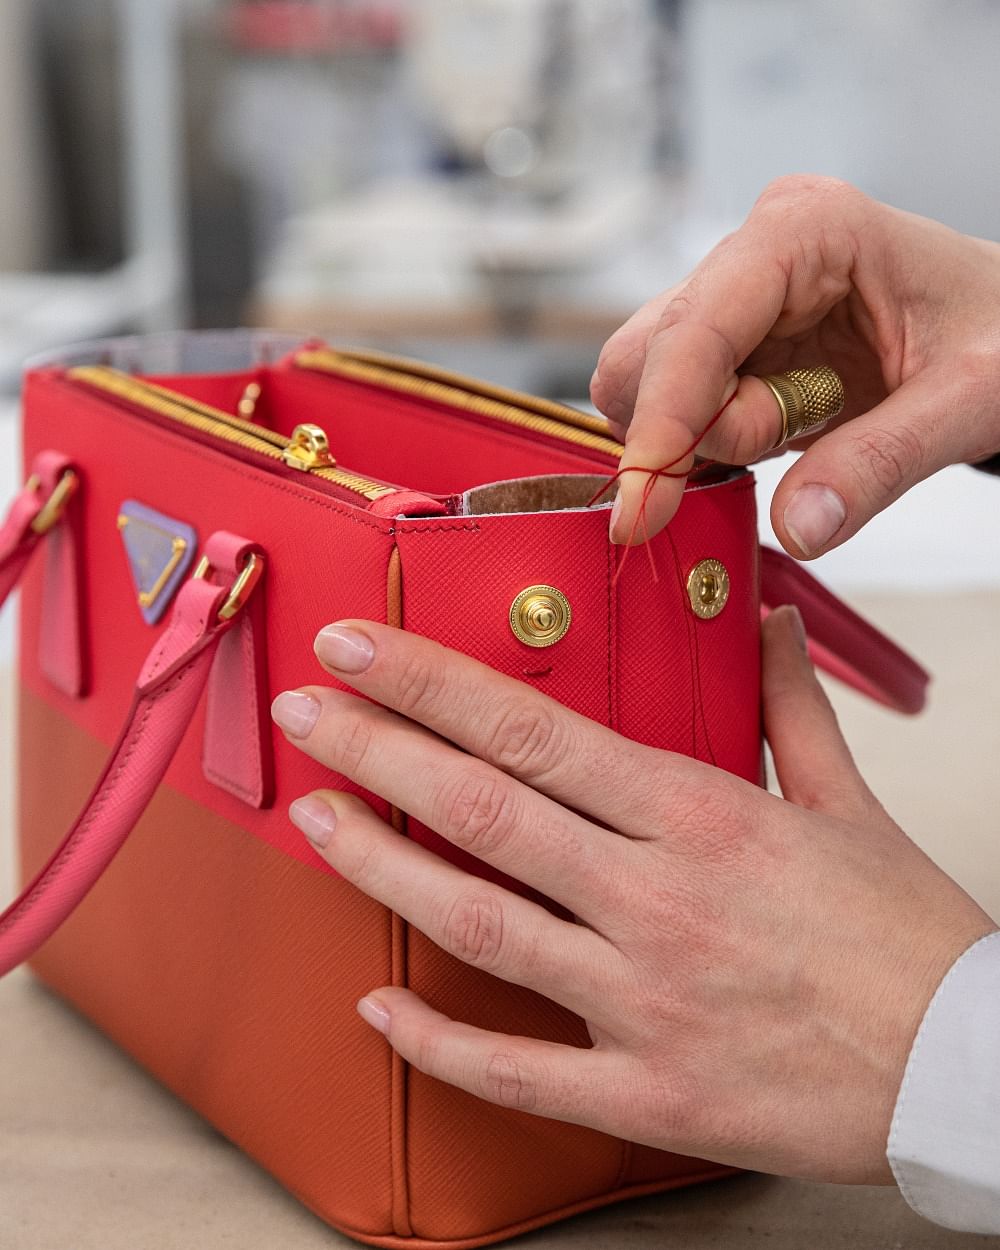 The Return Of A Classic: Why The Prada Galleria Bag Will Forever